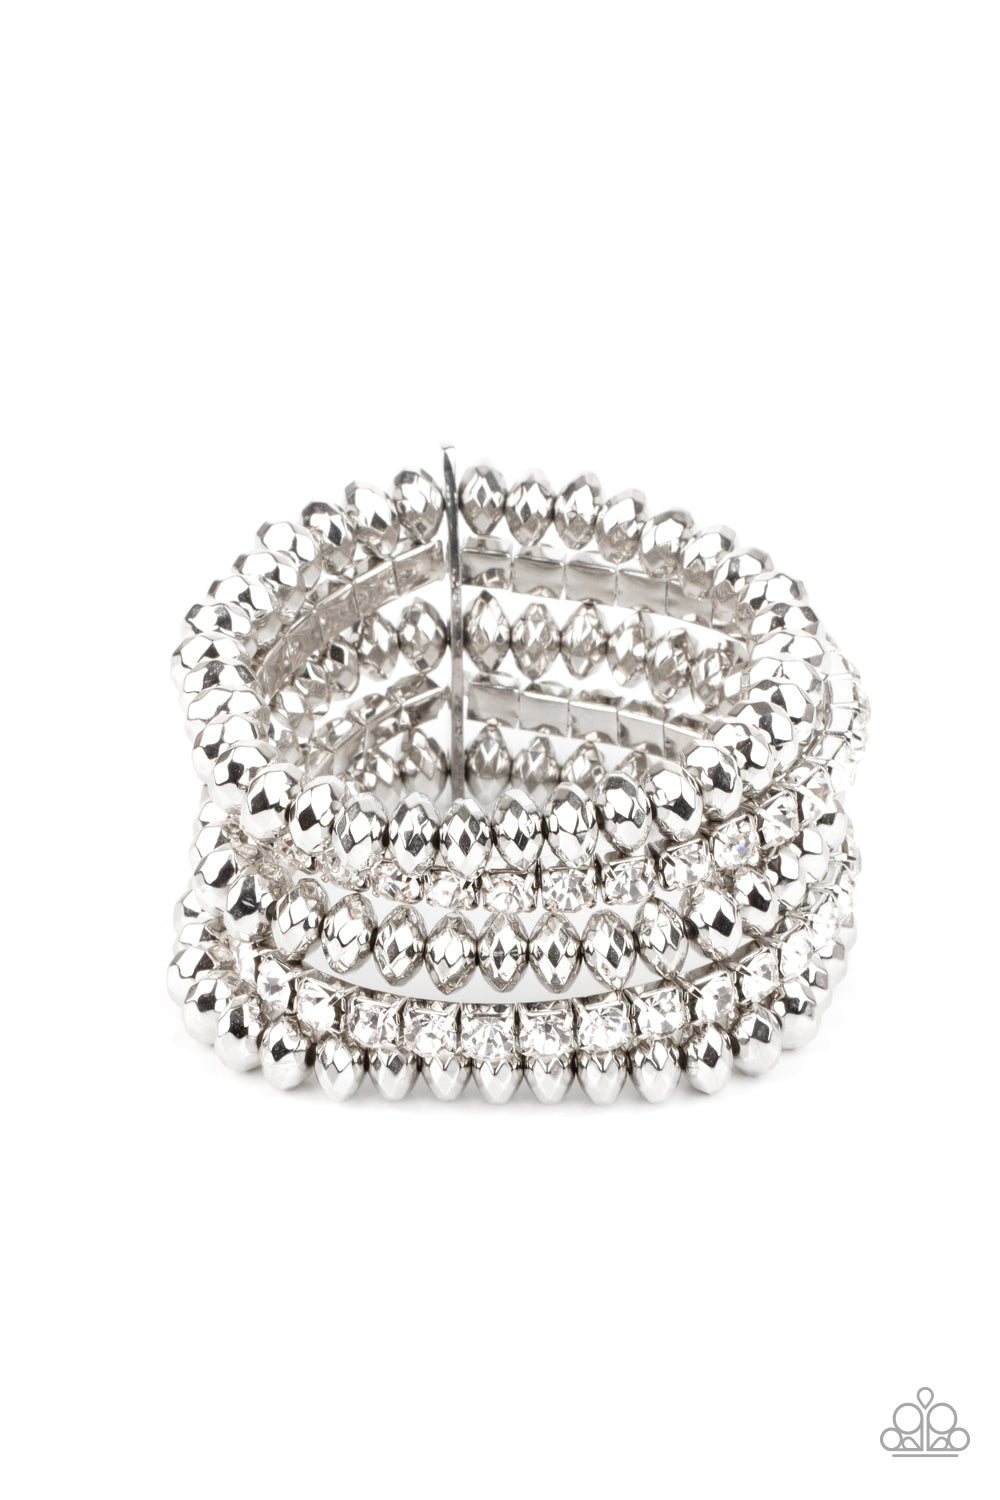 Paparazzi Best of LUXE White Stretch Bracelet - Life Of The Party March 2021